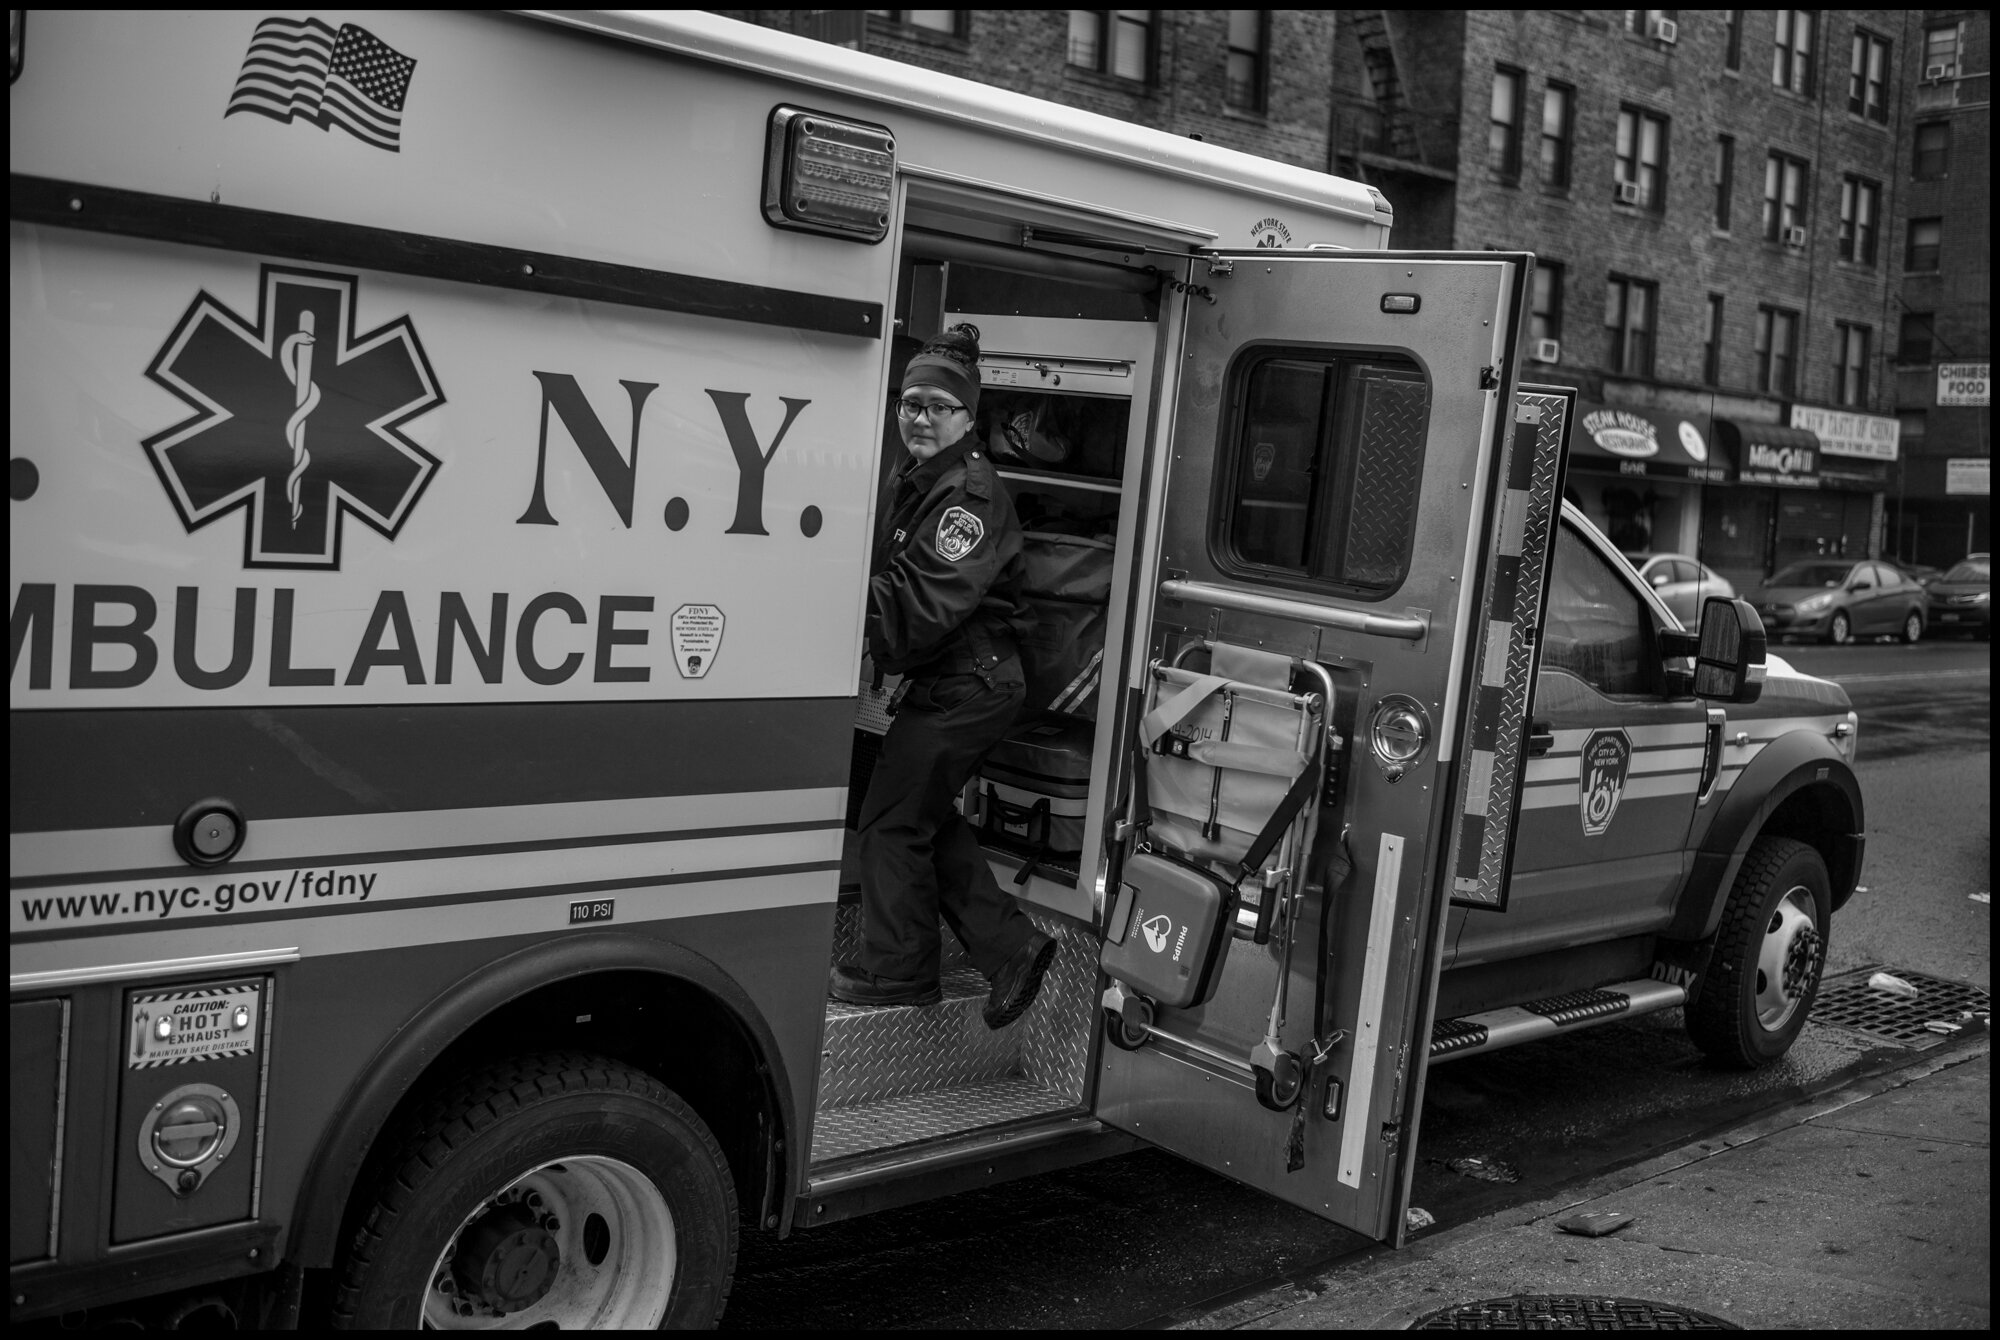  An ambulance behind the emergency room at Elmhurst Hospital in Queens.   March 29, 2020. © Peter Turnley  ID# 07-014 